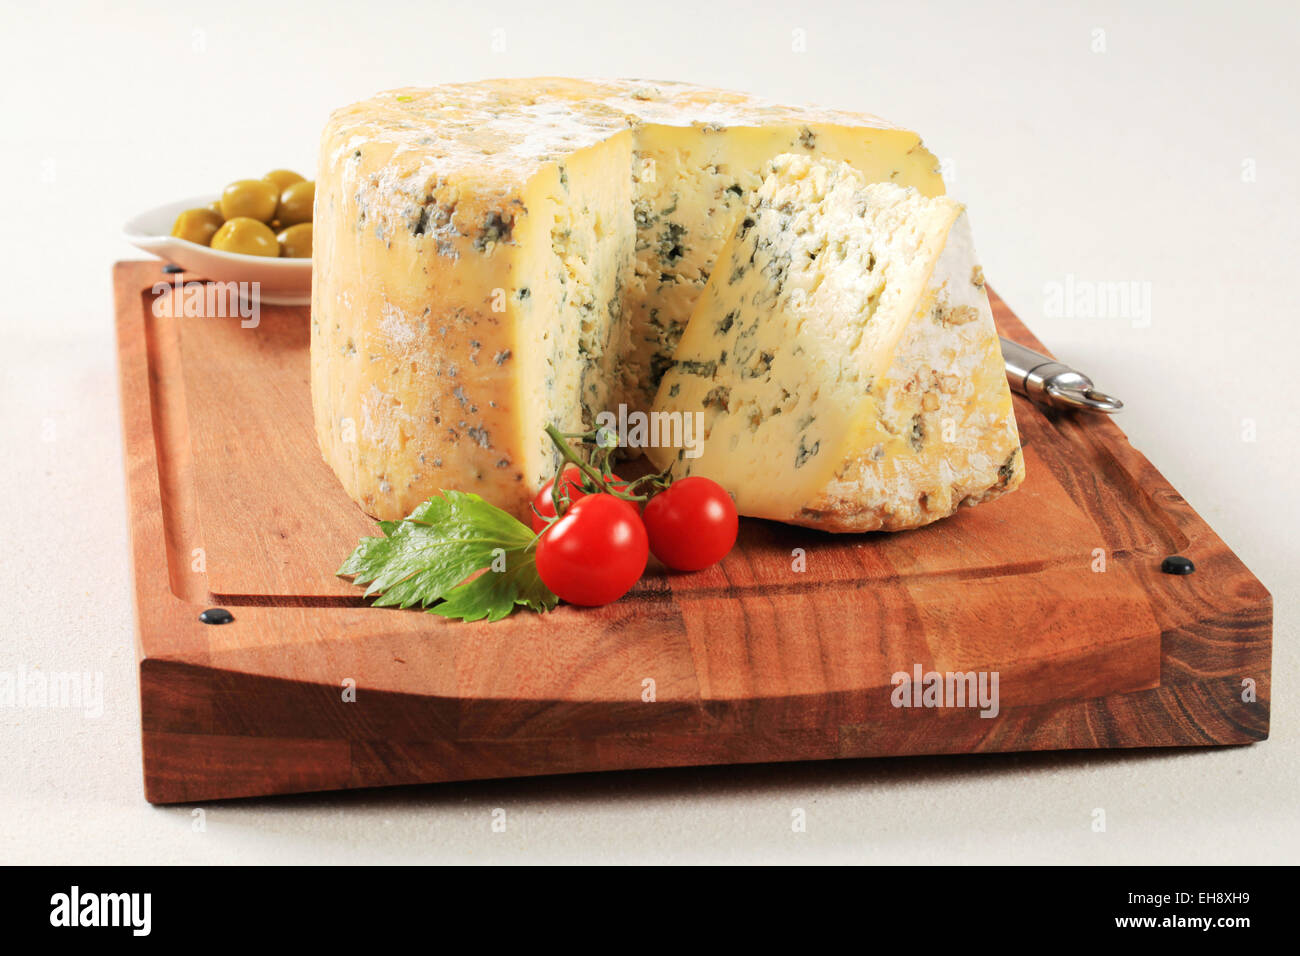 Wheel of blue cheese on cutting board Stock Photo